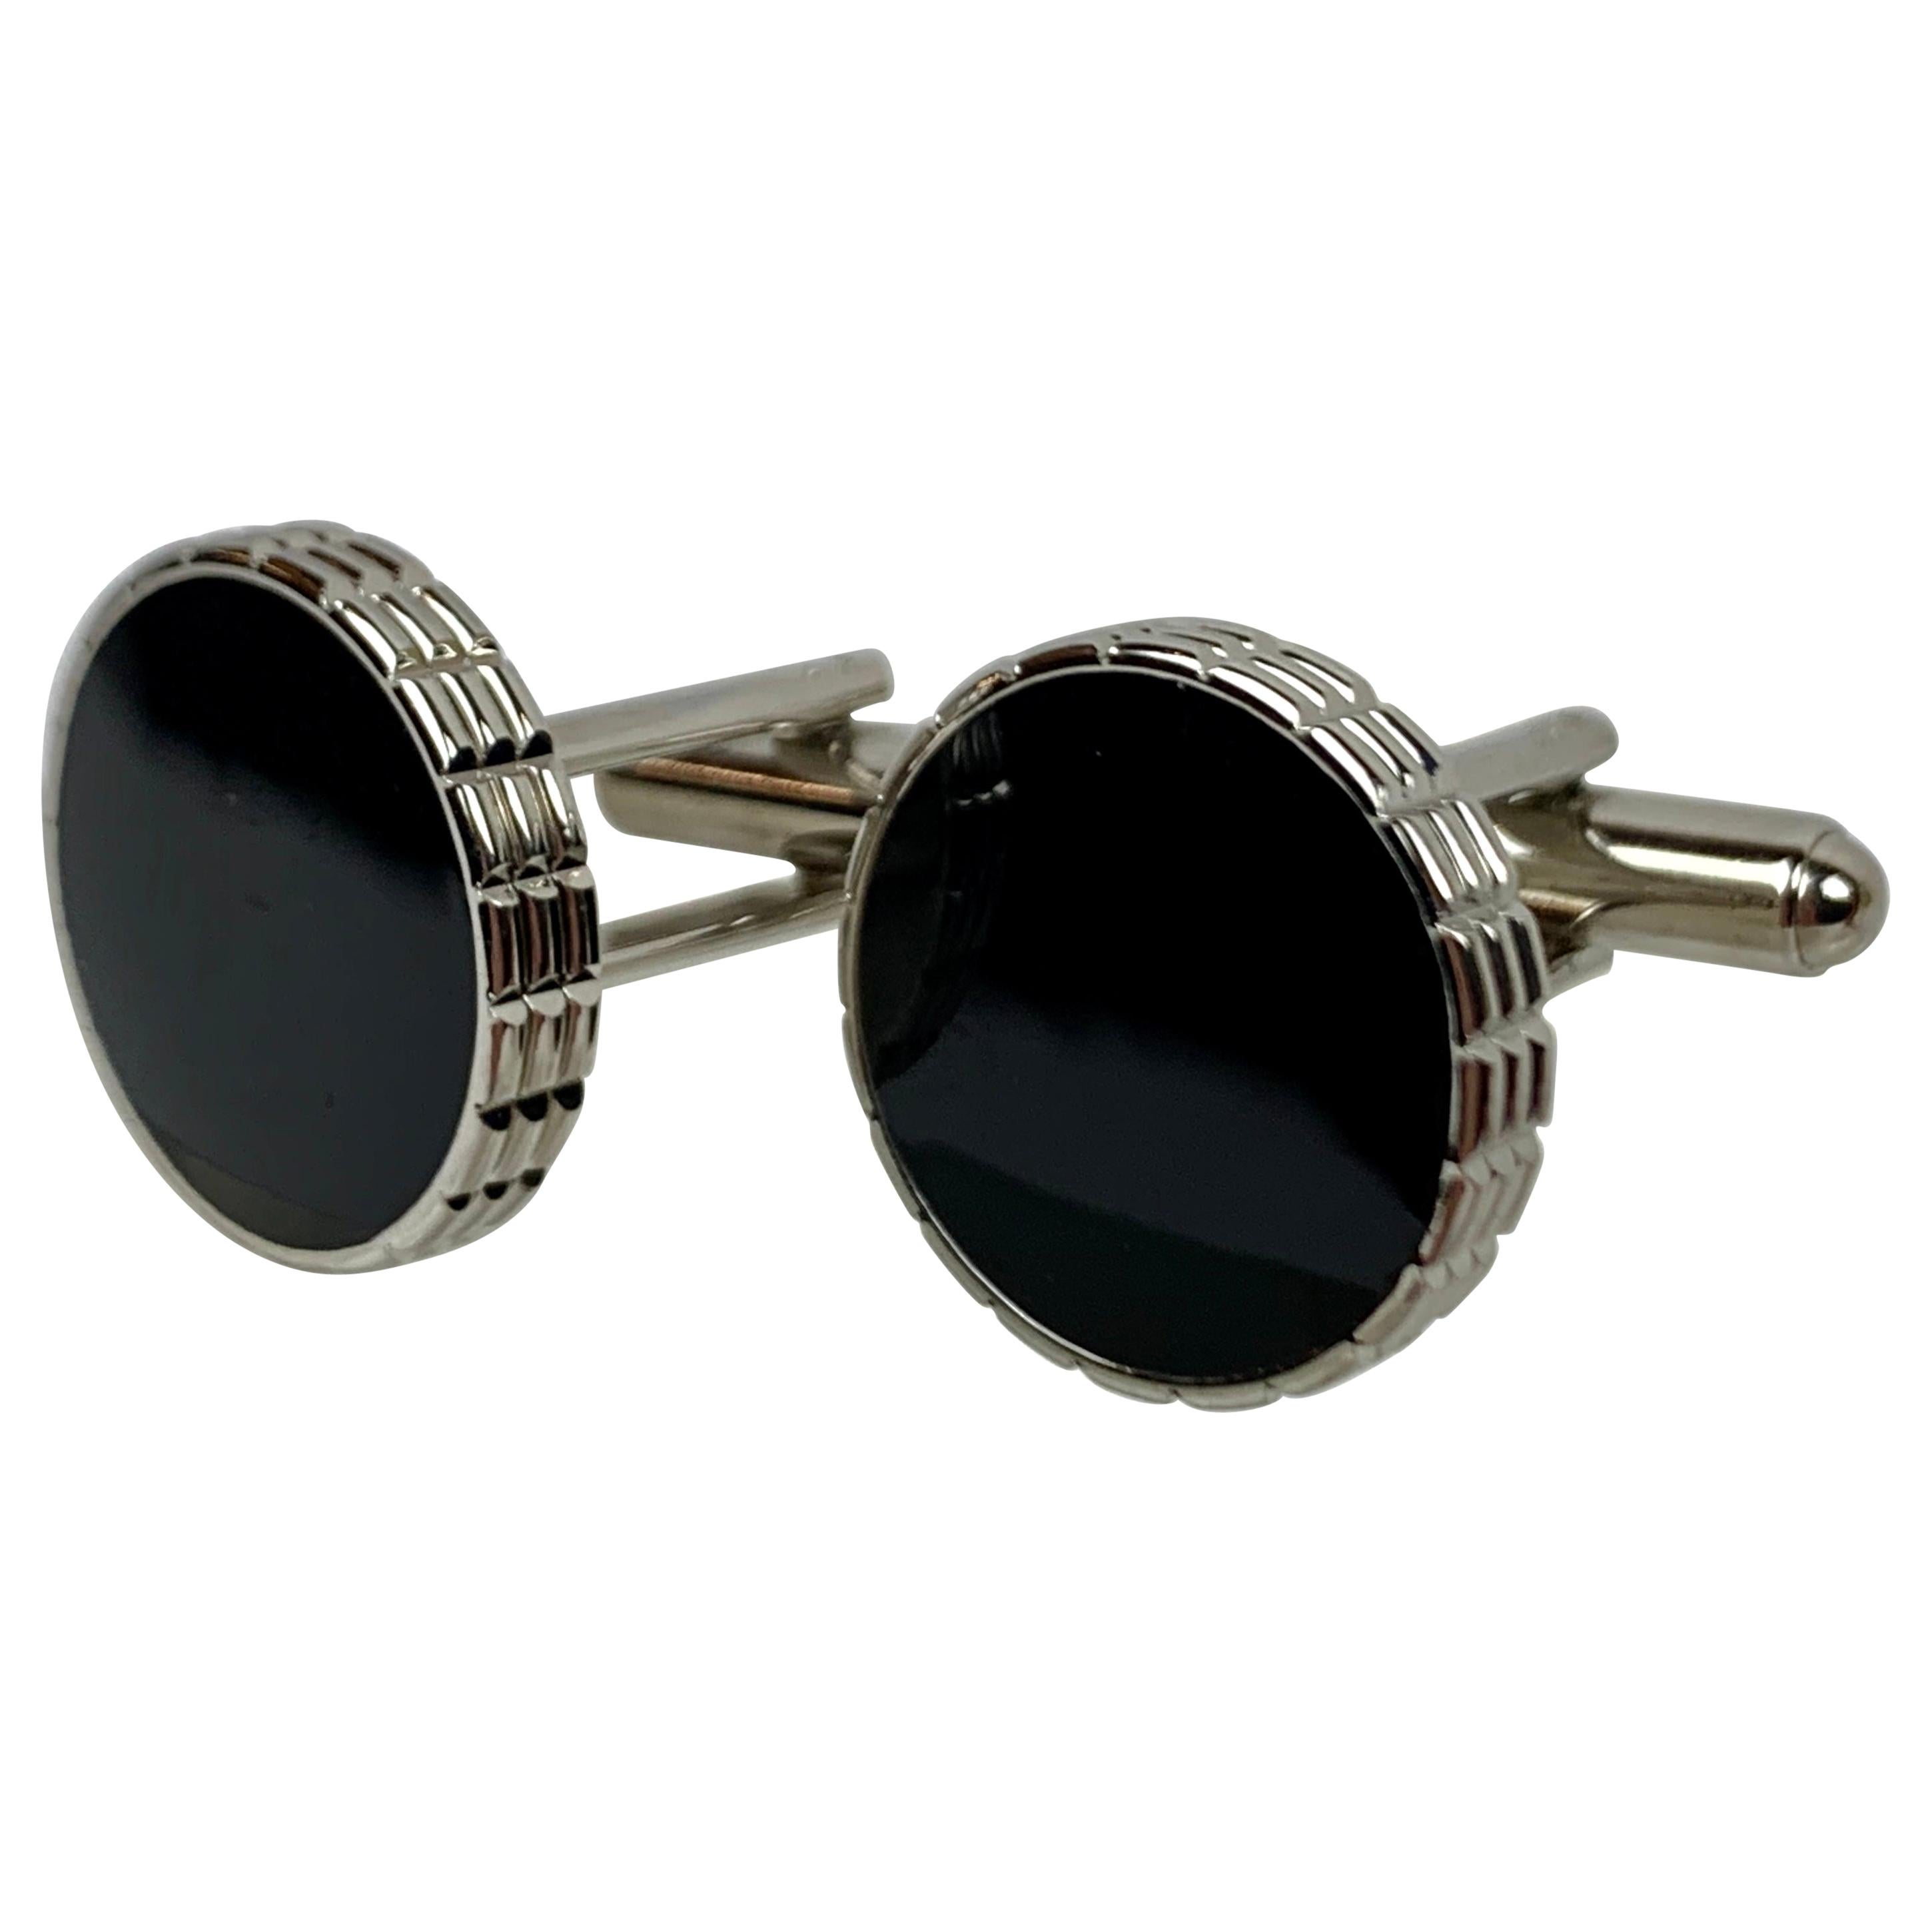 A Pair of Round Cufflinks with Insets of Black Enamel-American, c. 1950's-60's For Sale